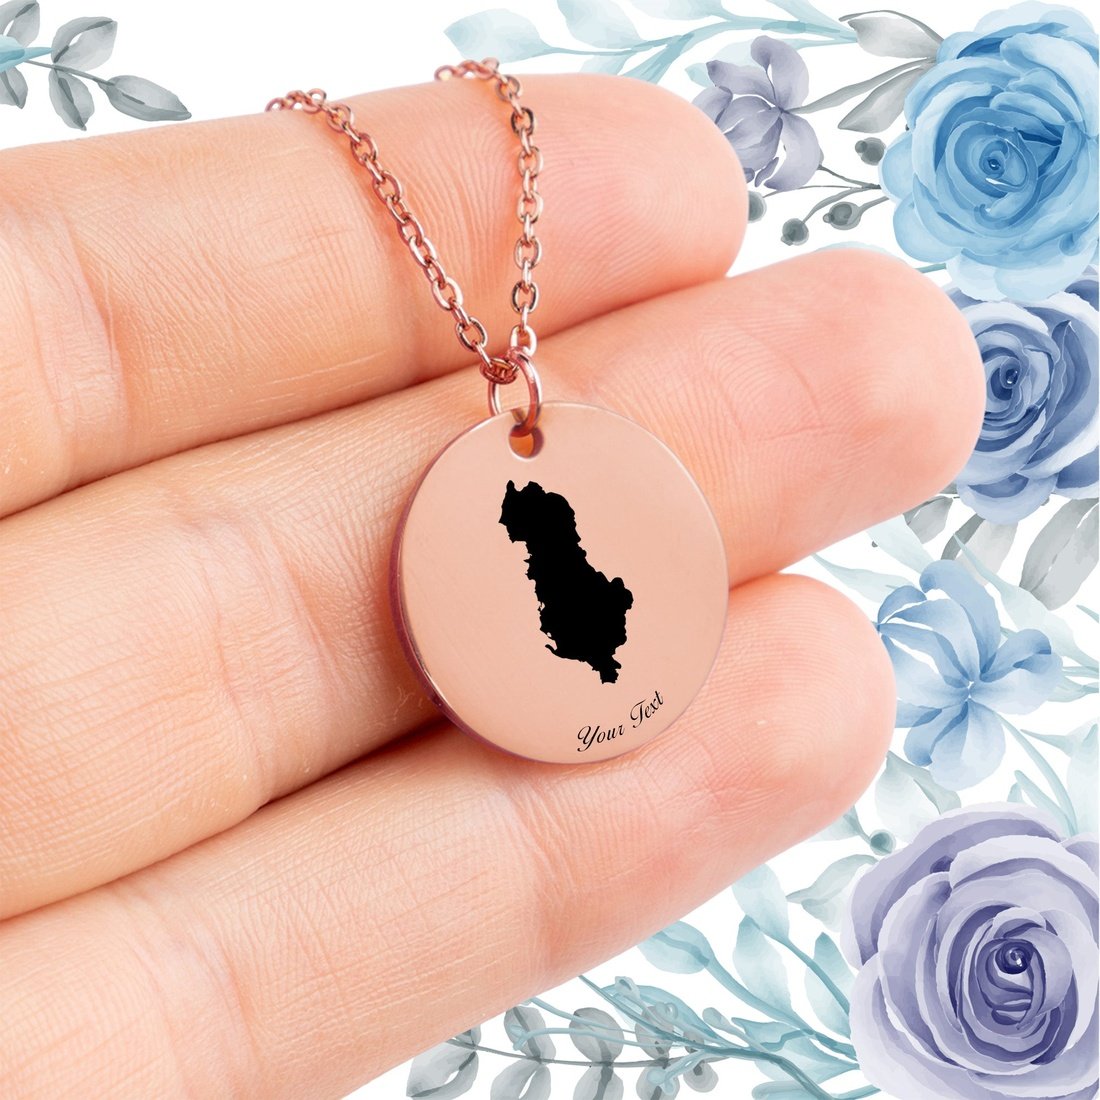 Albania Country Map Necklace - Personalizable Jewelry